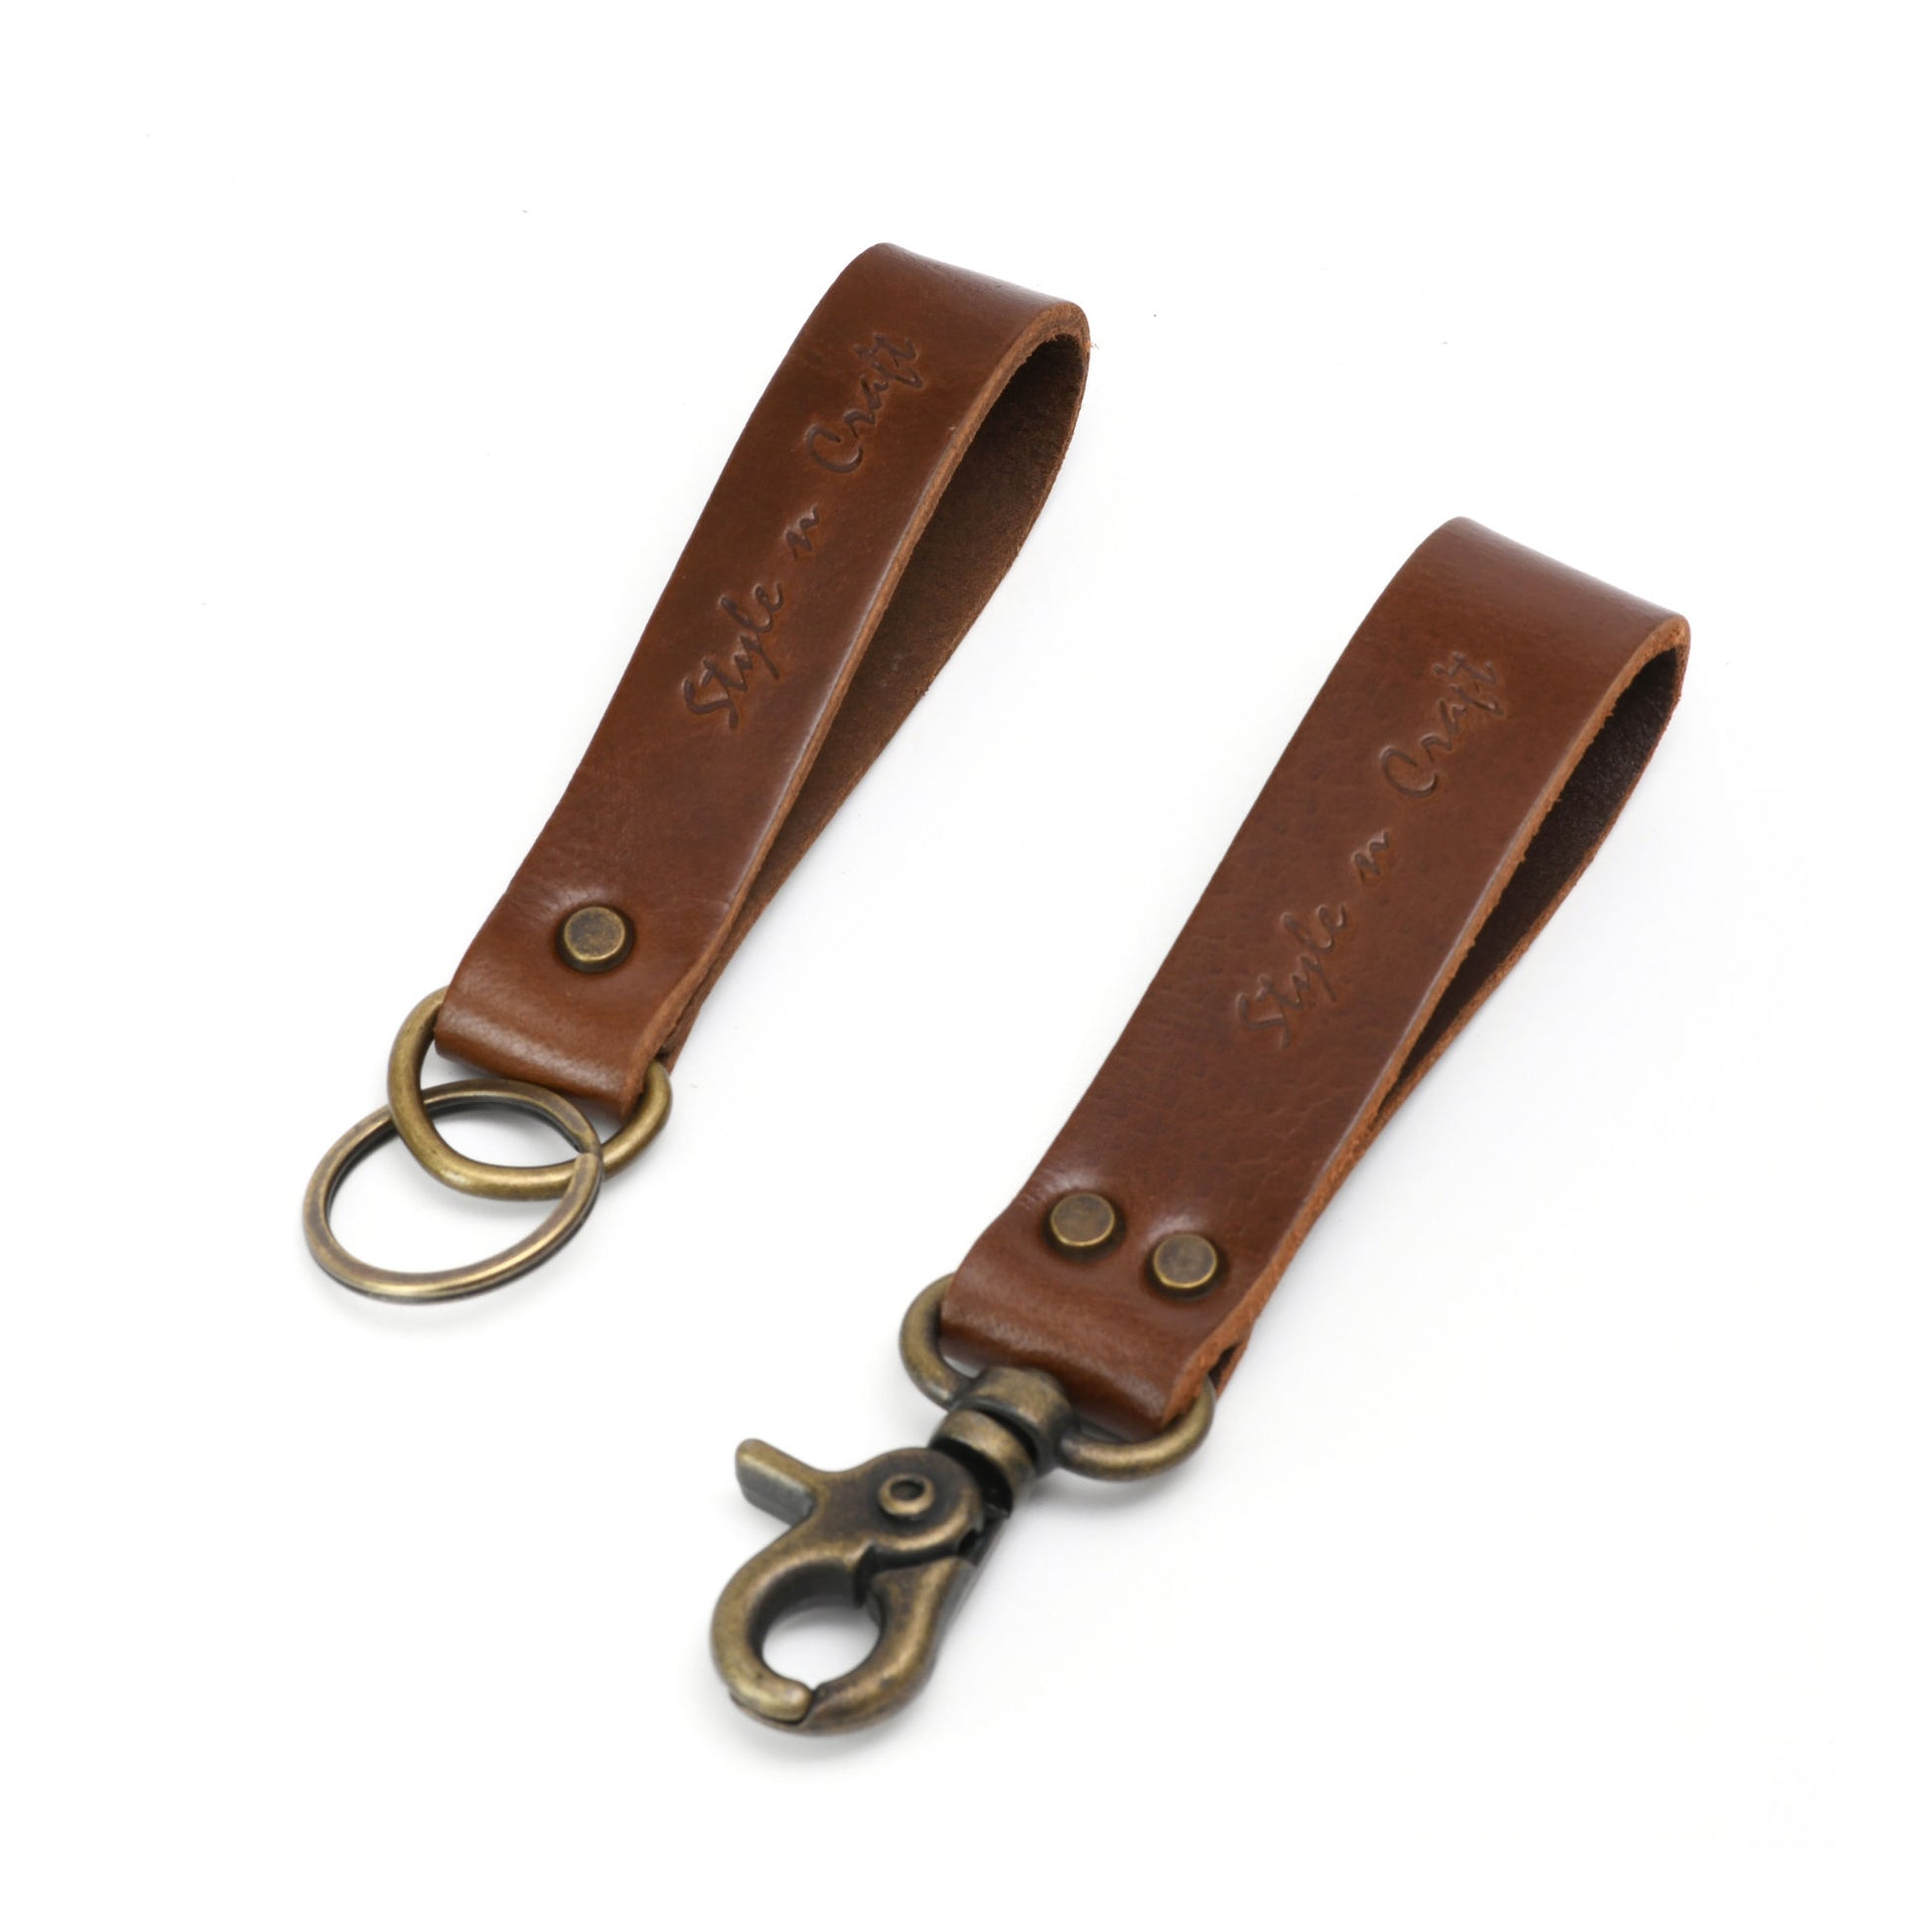 Style n Craft 98203 - Snap Loop & Key Ring Combination in Heavy Top Grain Leather in Dark Tan Color. Both Can Easily Slide on a 2 Inch Wide Belt. Front Angled View